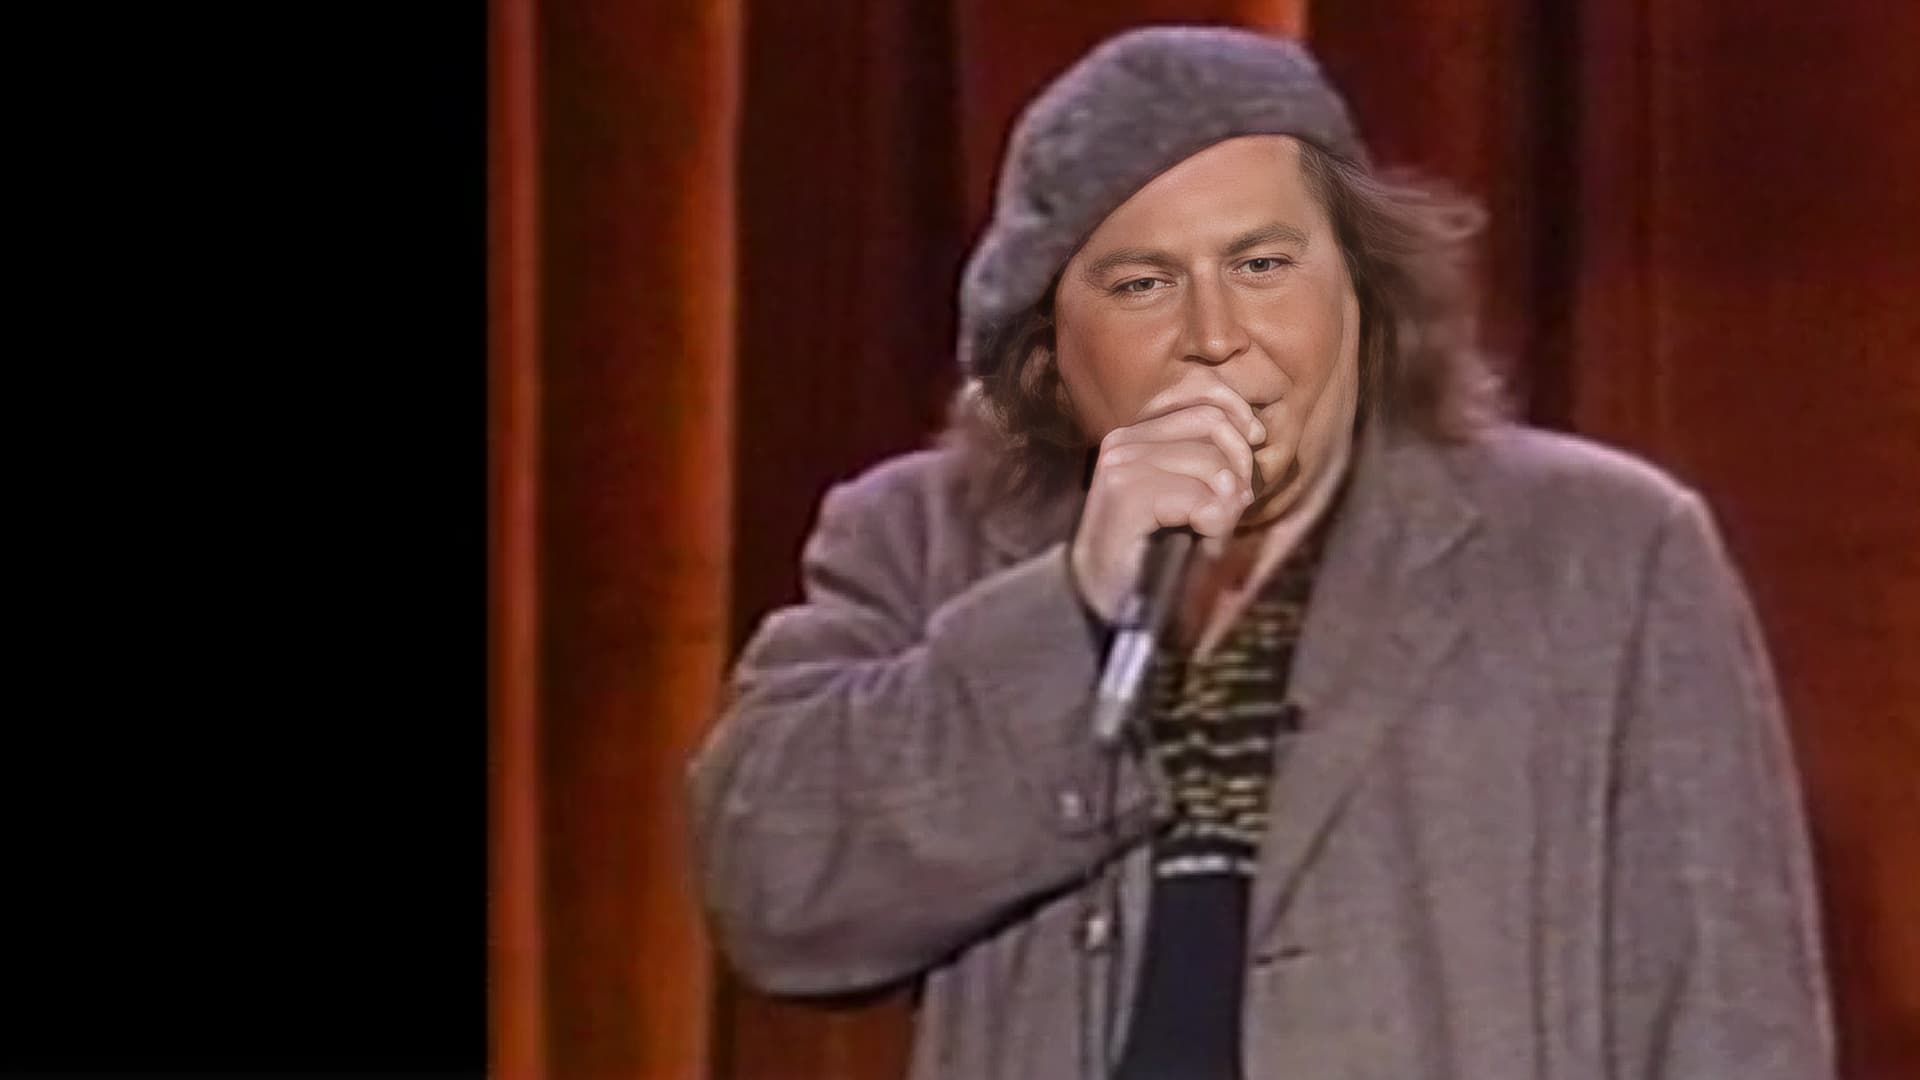 Sam Kinison: Why Did We Laugh? background